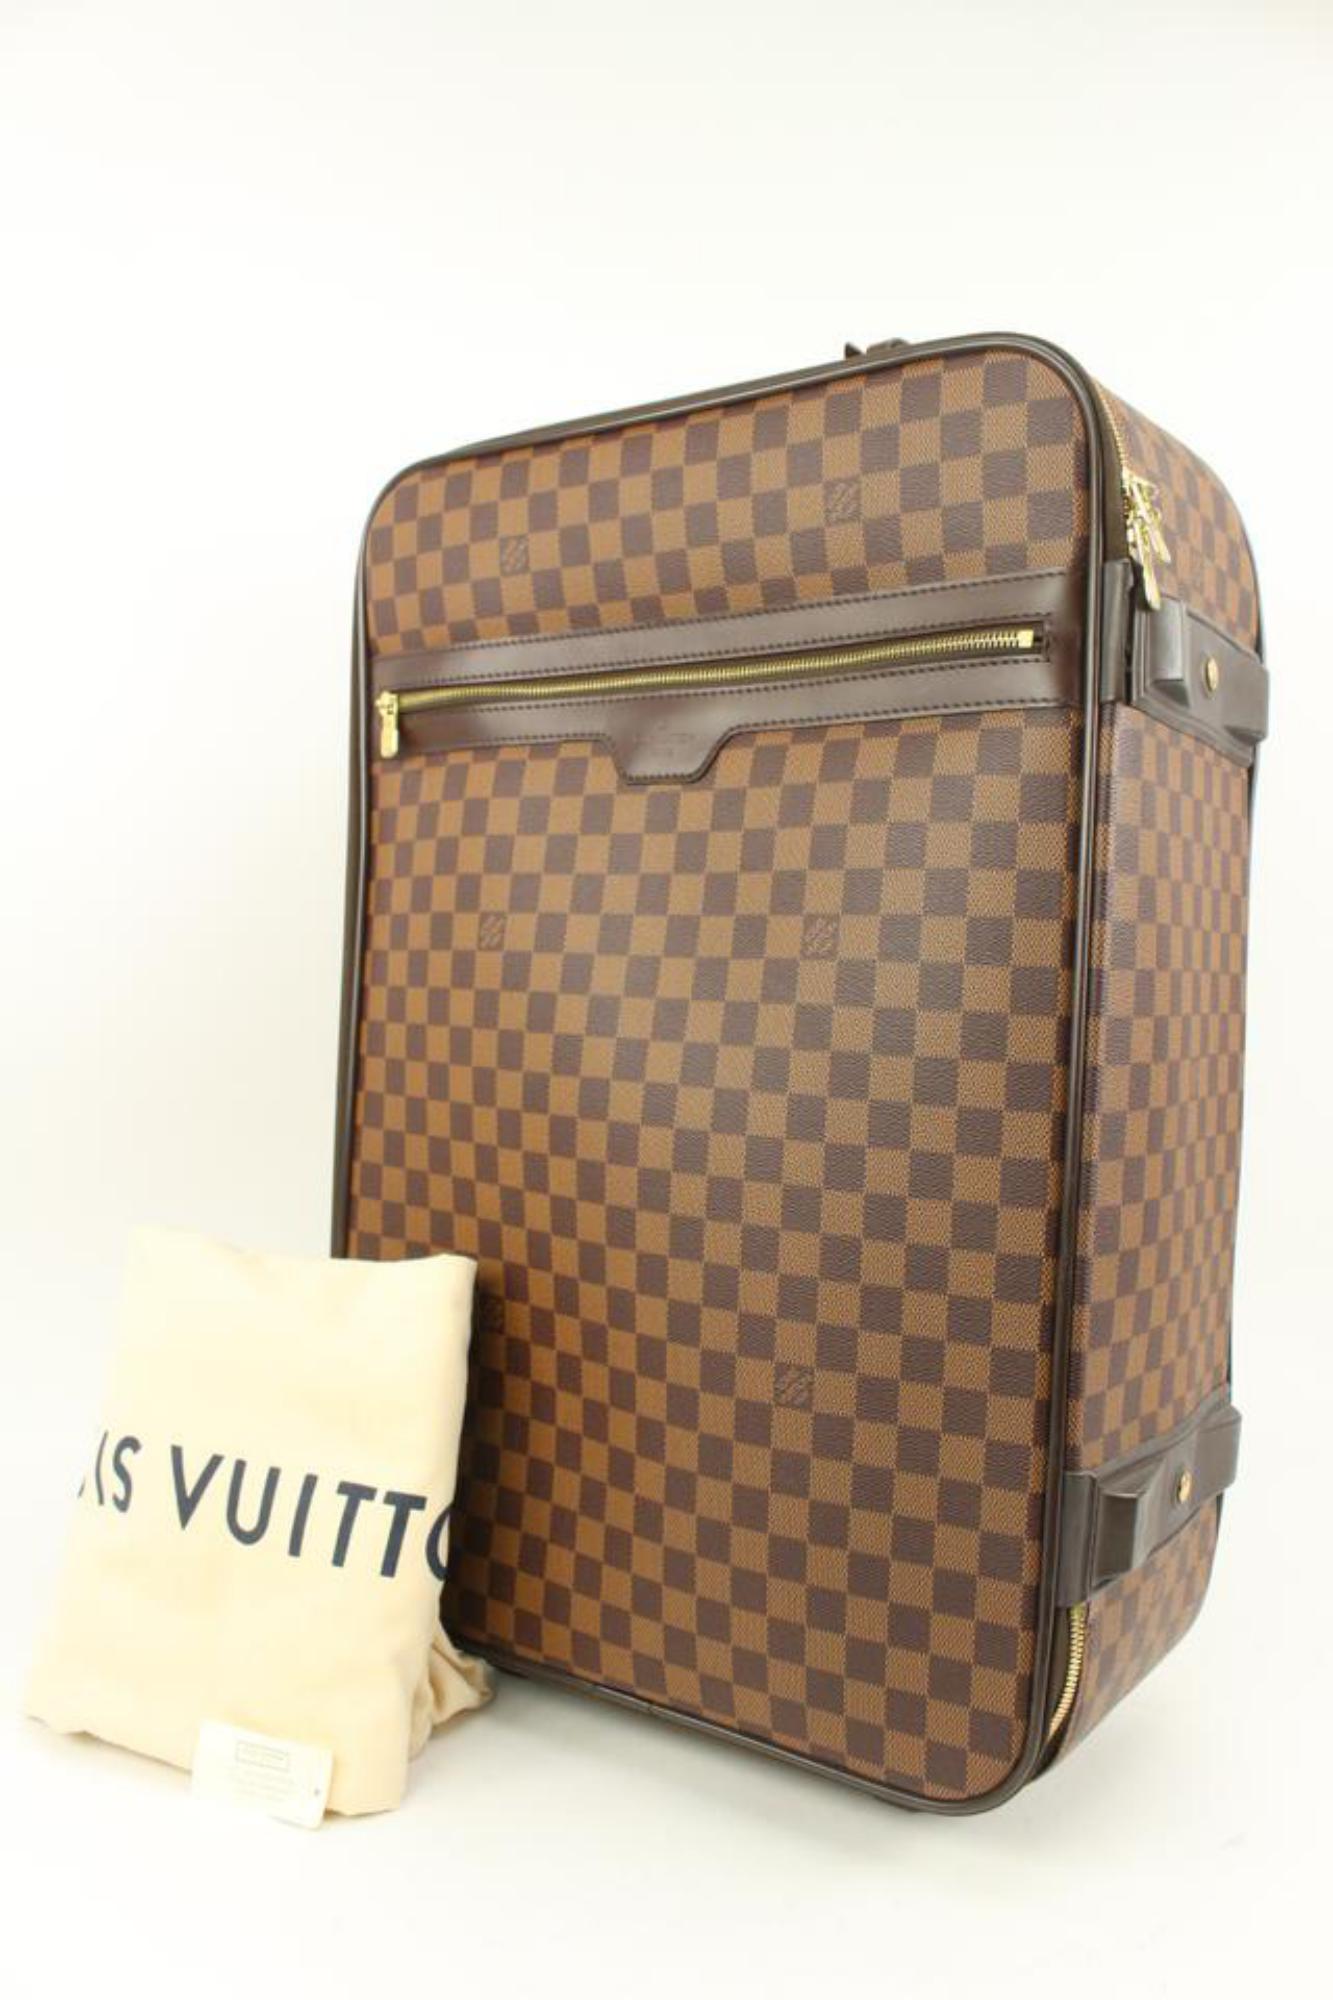 Louis Vuitton Damier Ebene Pegase 55 Rolling Luggage Trolley Suitcase 48lz64
Date Code/Serial Number: SP0095
Made In: France
Measurements: Length:  14.5